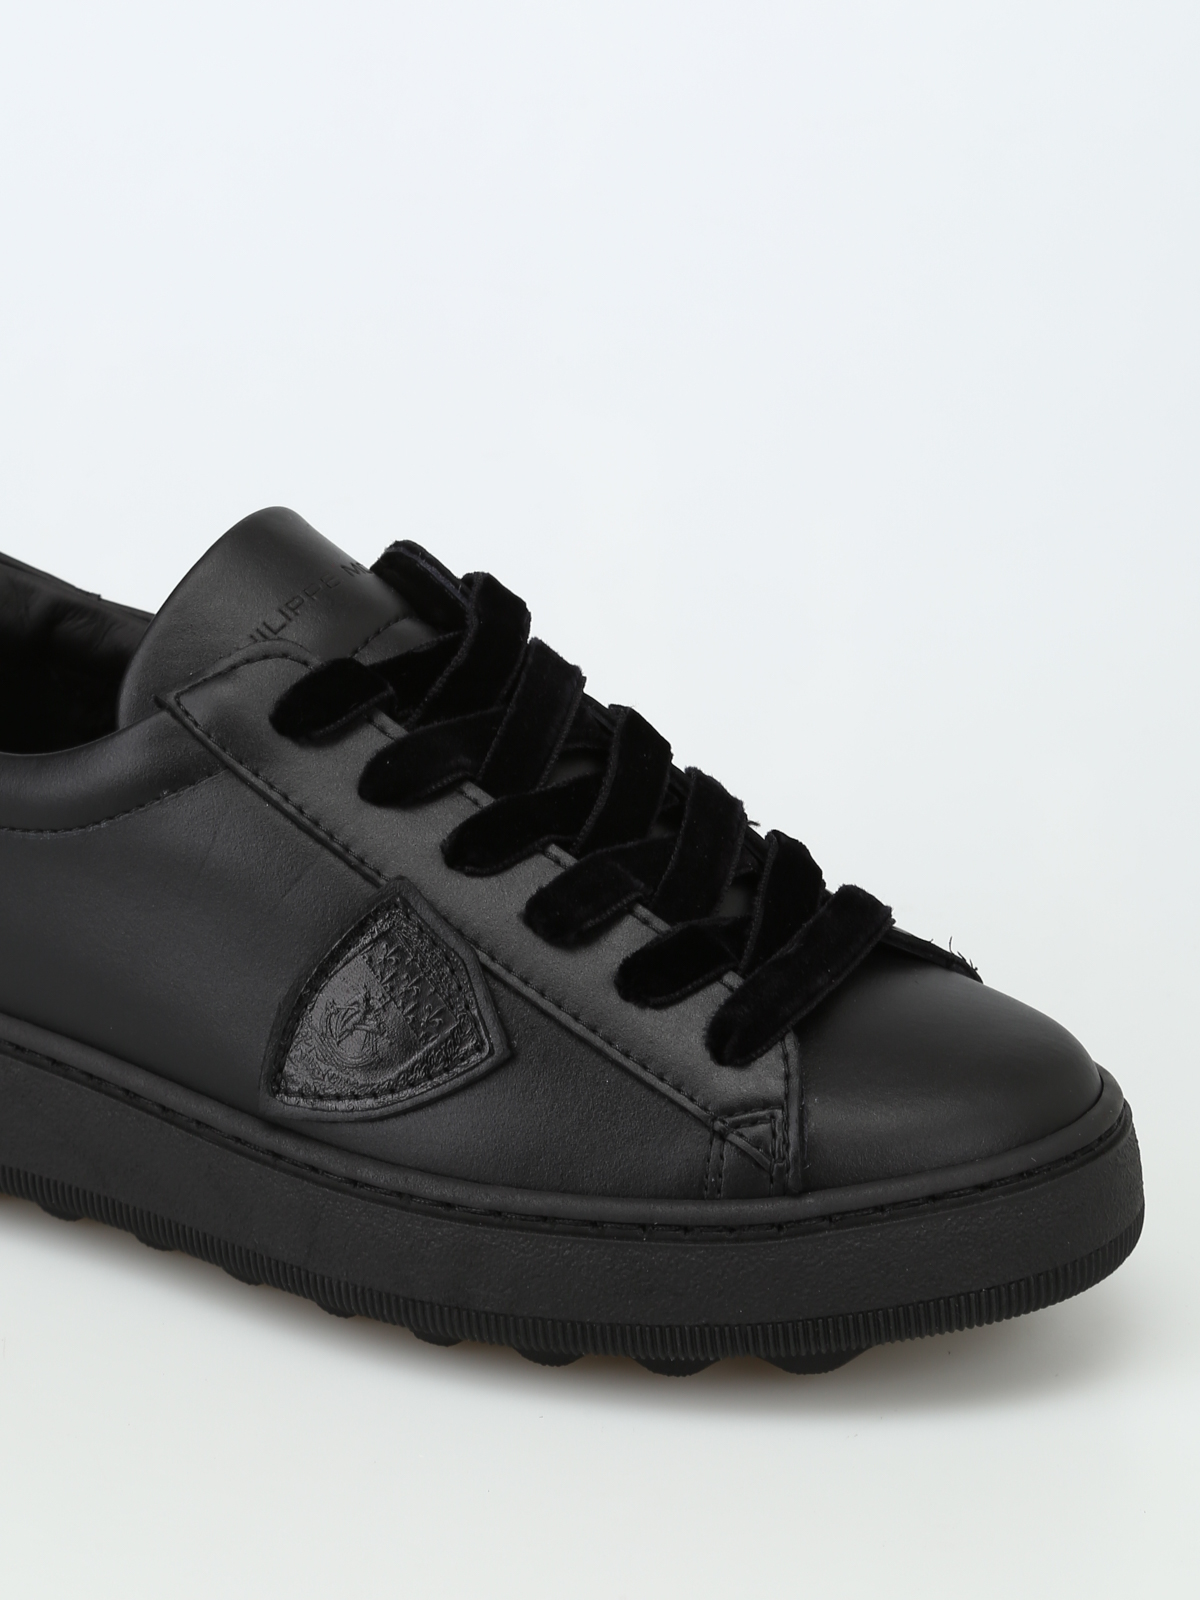 Trainers Philippe Model - Madeleine black leather sneakers - VBLDM004